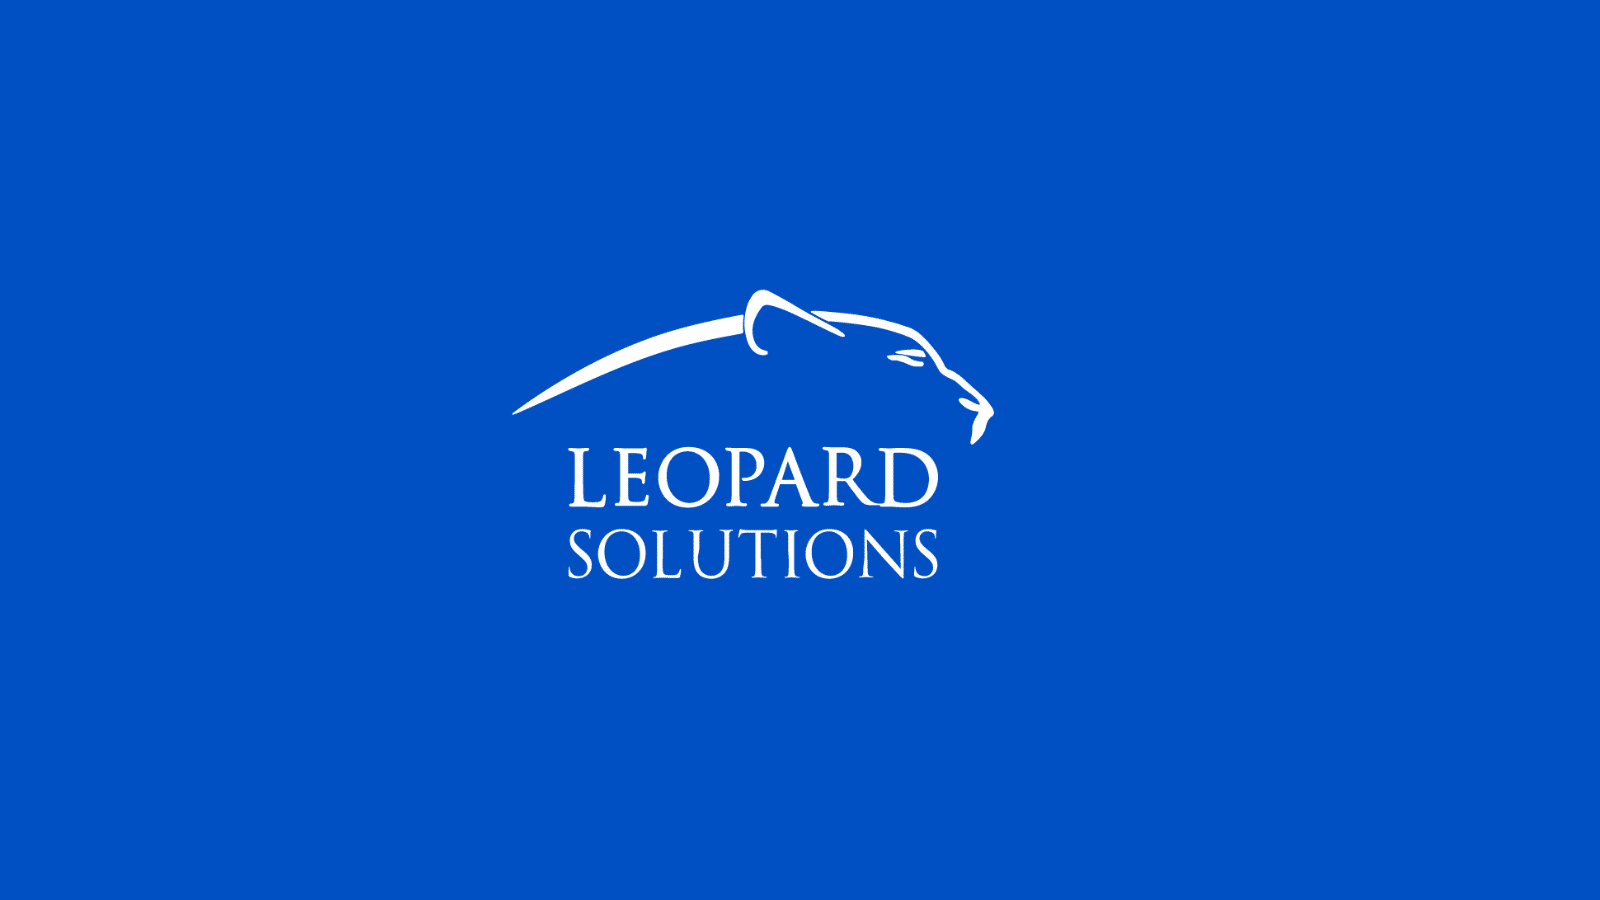 Learn More About SurePoint’s Acquisition of Leopard Solutions